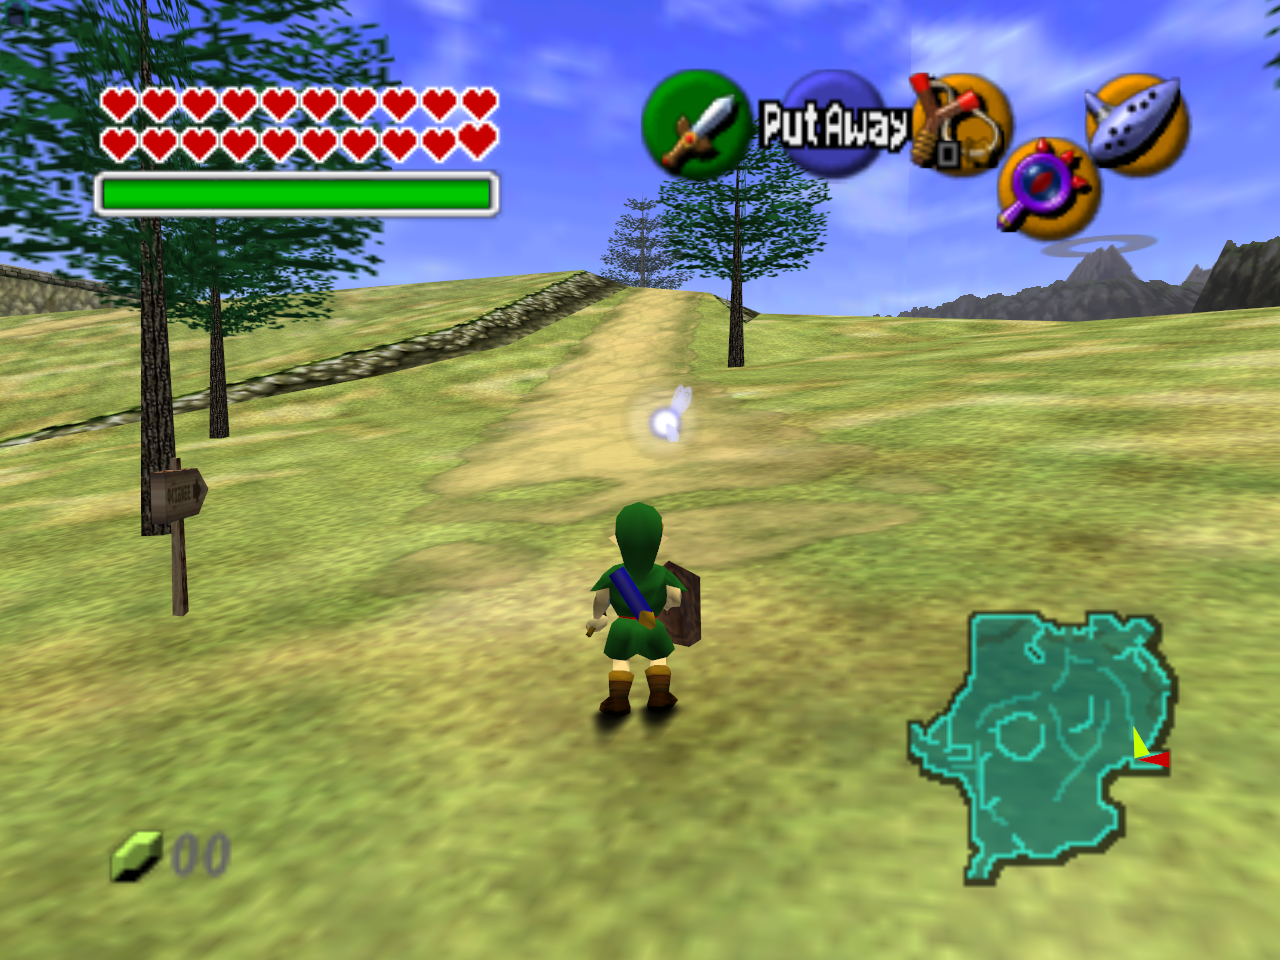 Les jeux N64 ont t'ils tous mal vieillis? - Page 2 The-Legend-of-Zelda-Ocarina-of-Time-gameplay